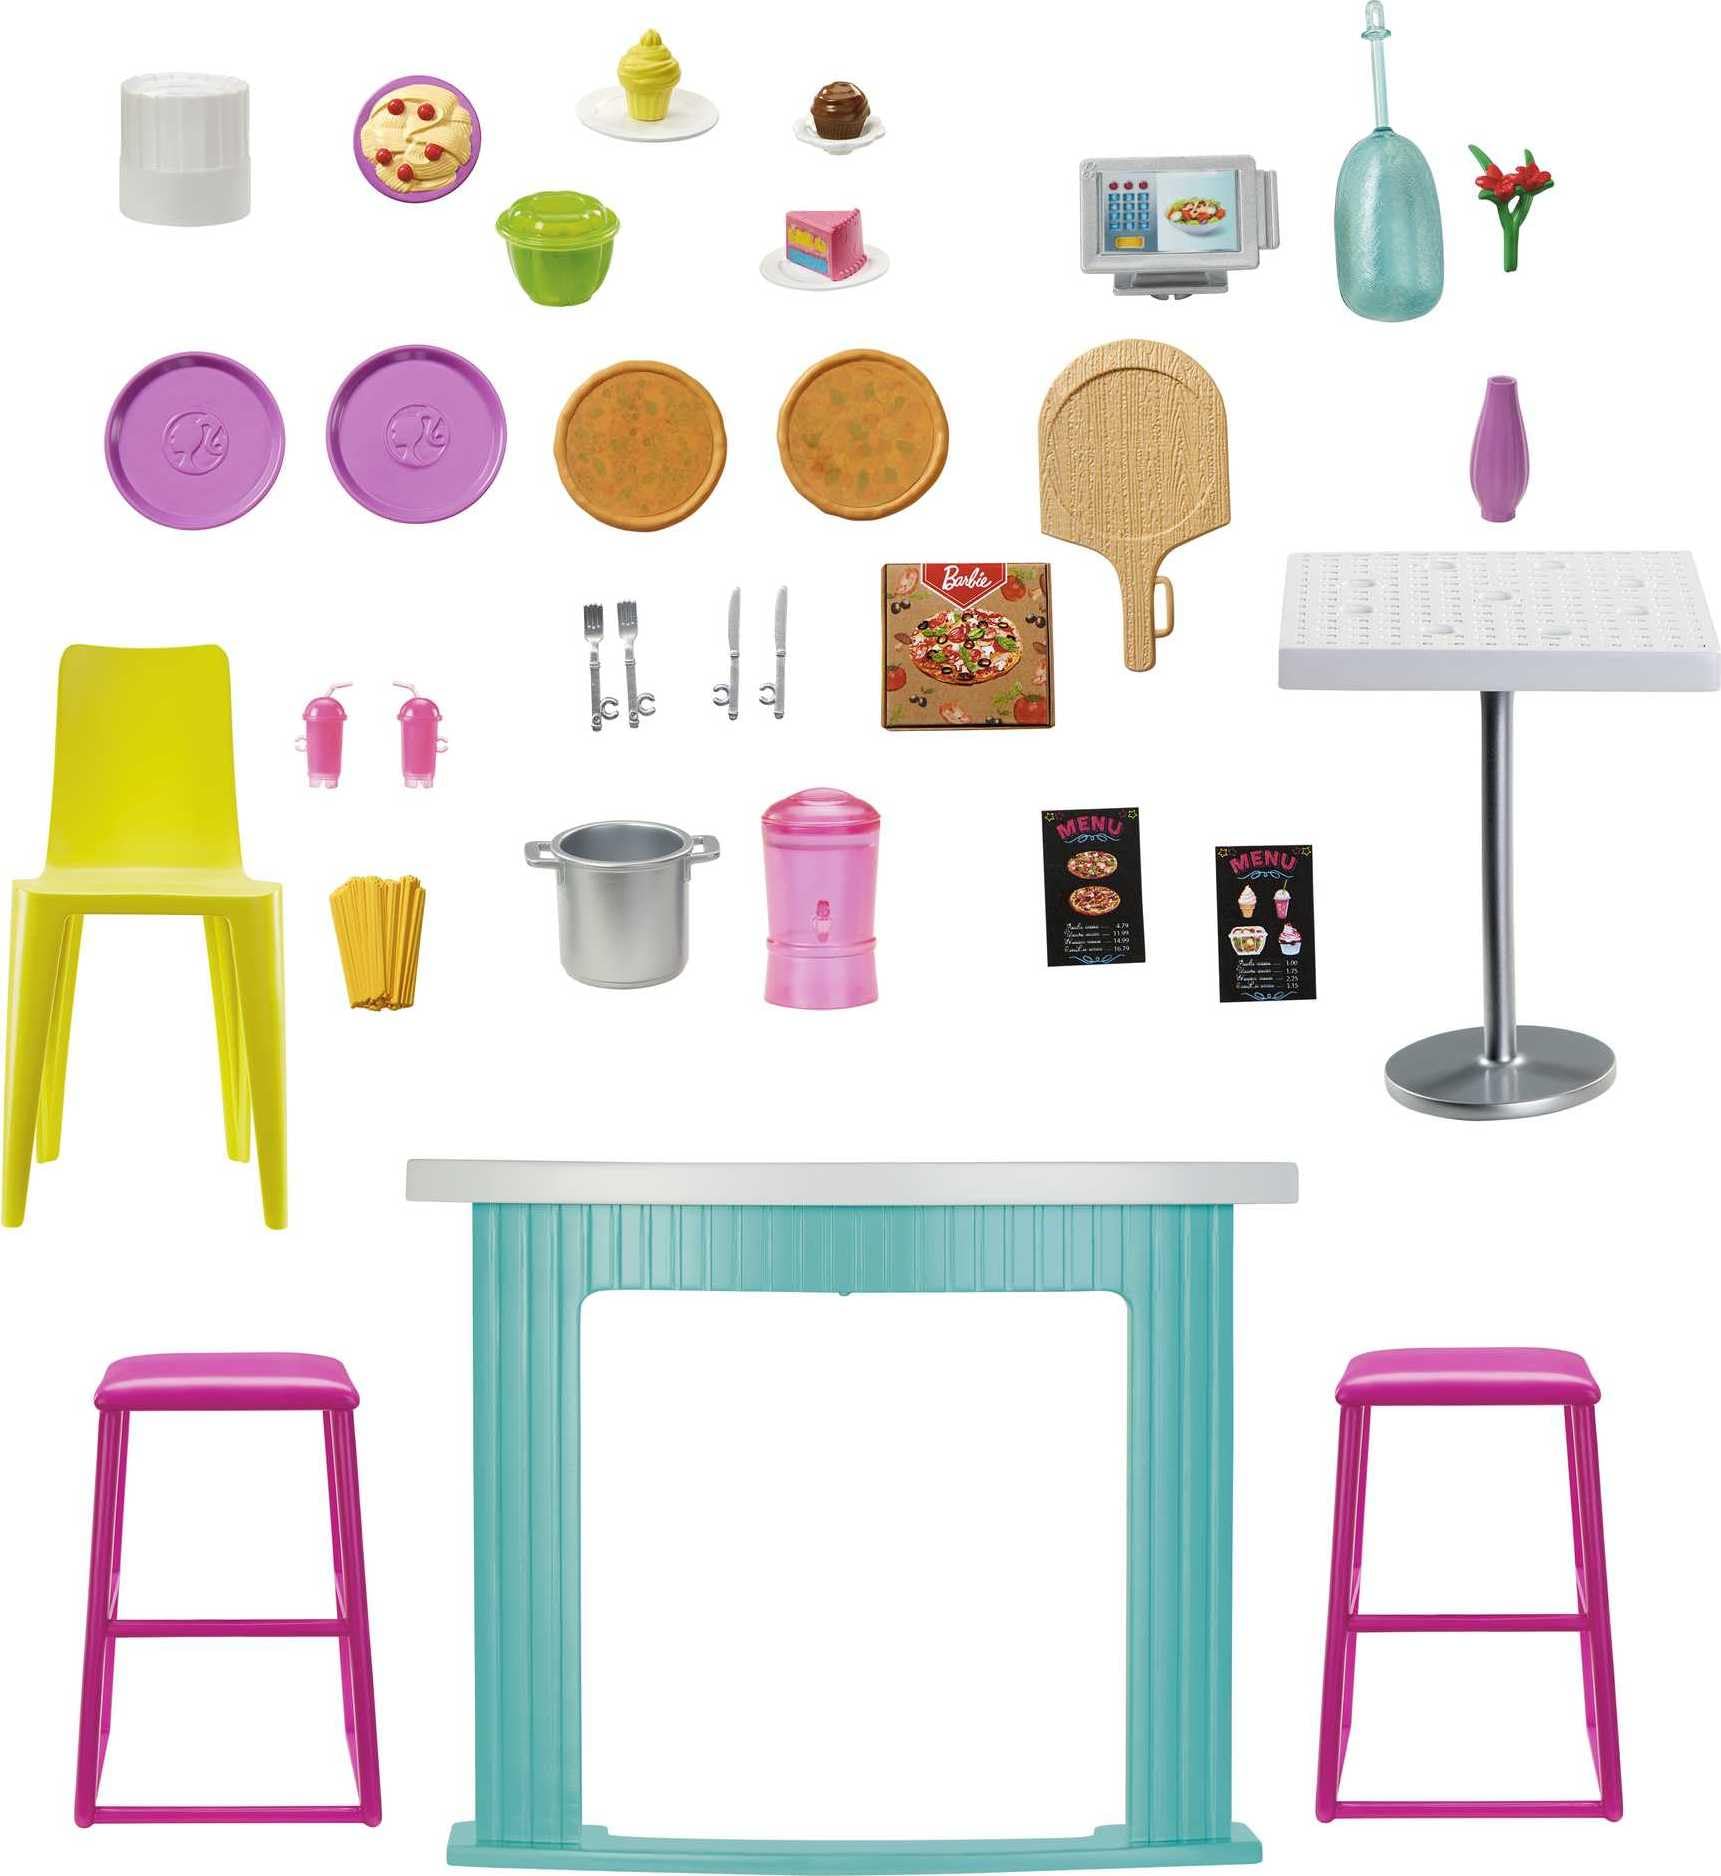 Barbie Doll & Playset, Cook 'n Grill Restaurant with Pizza Oven & 30+ Pieces Including Furniture & Kitchen Accessories